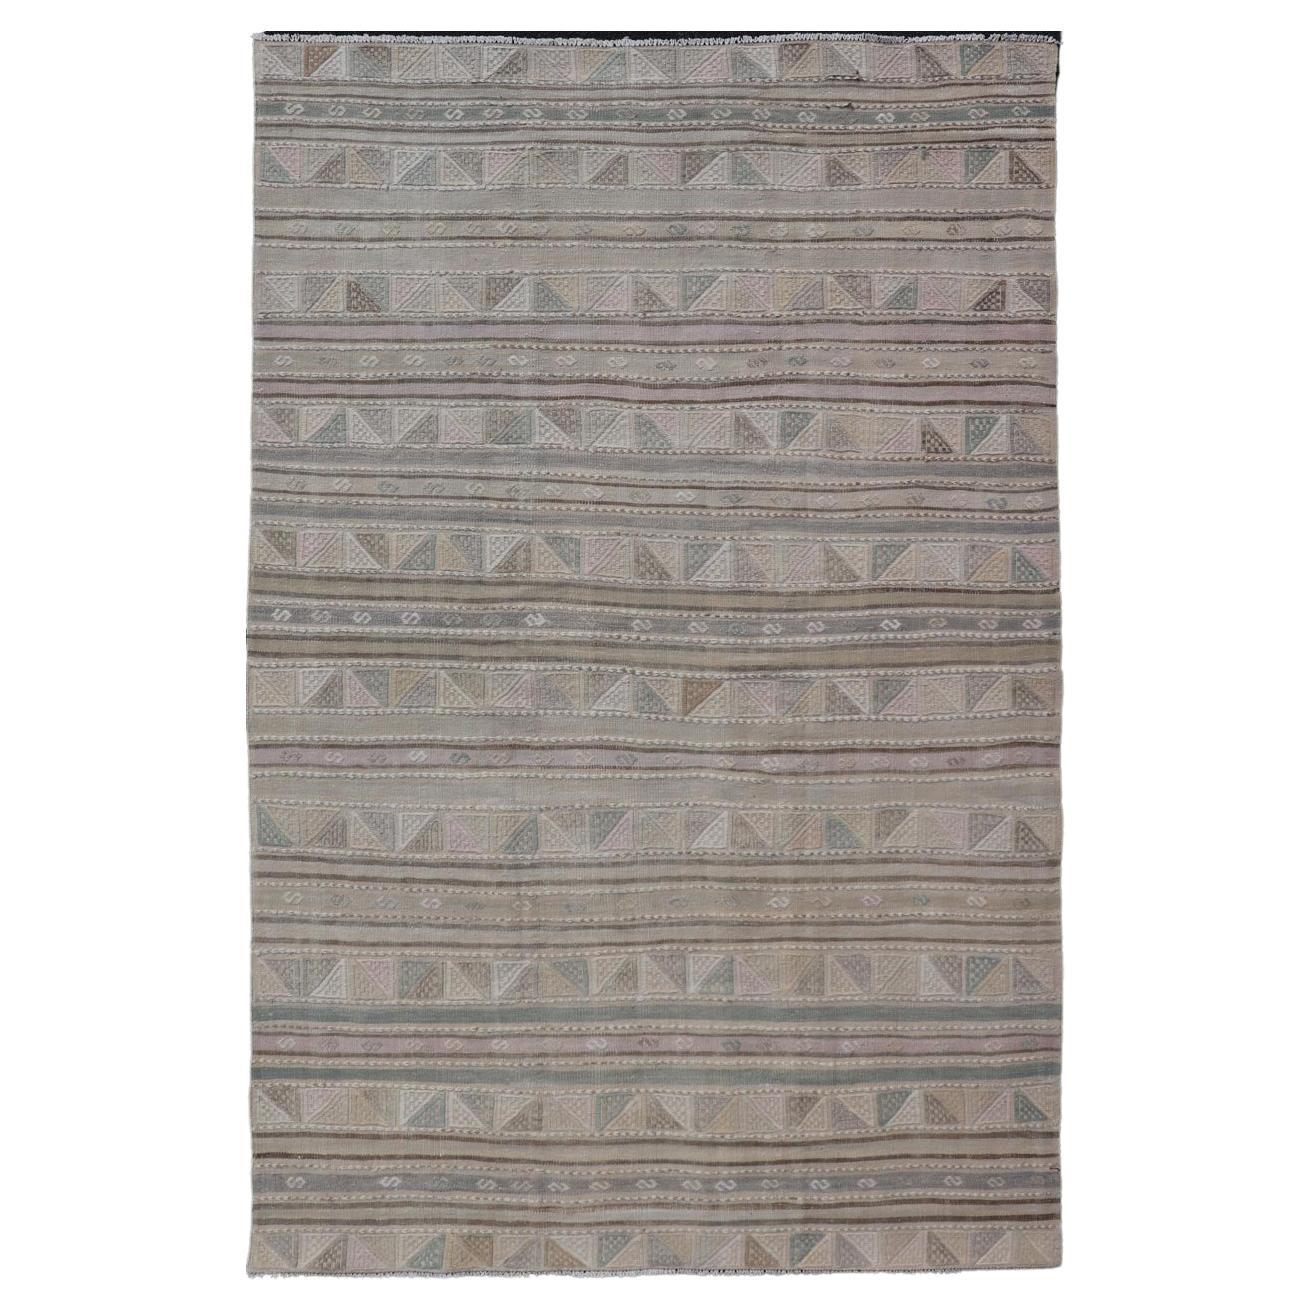 Turkish Flat-Weave with Embroideries Kilim in Taupe, Green, Brown, and Tan